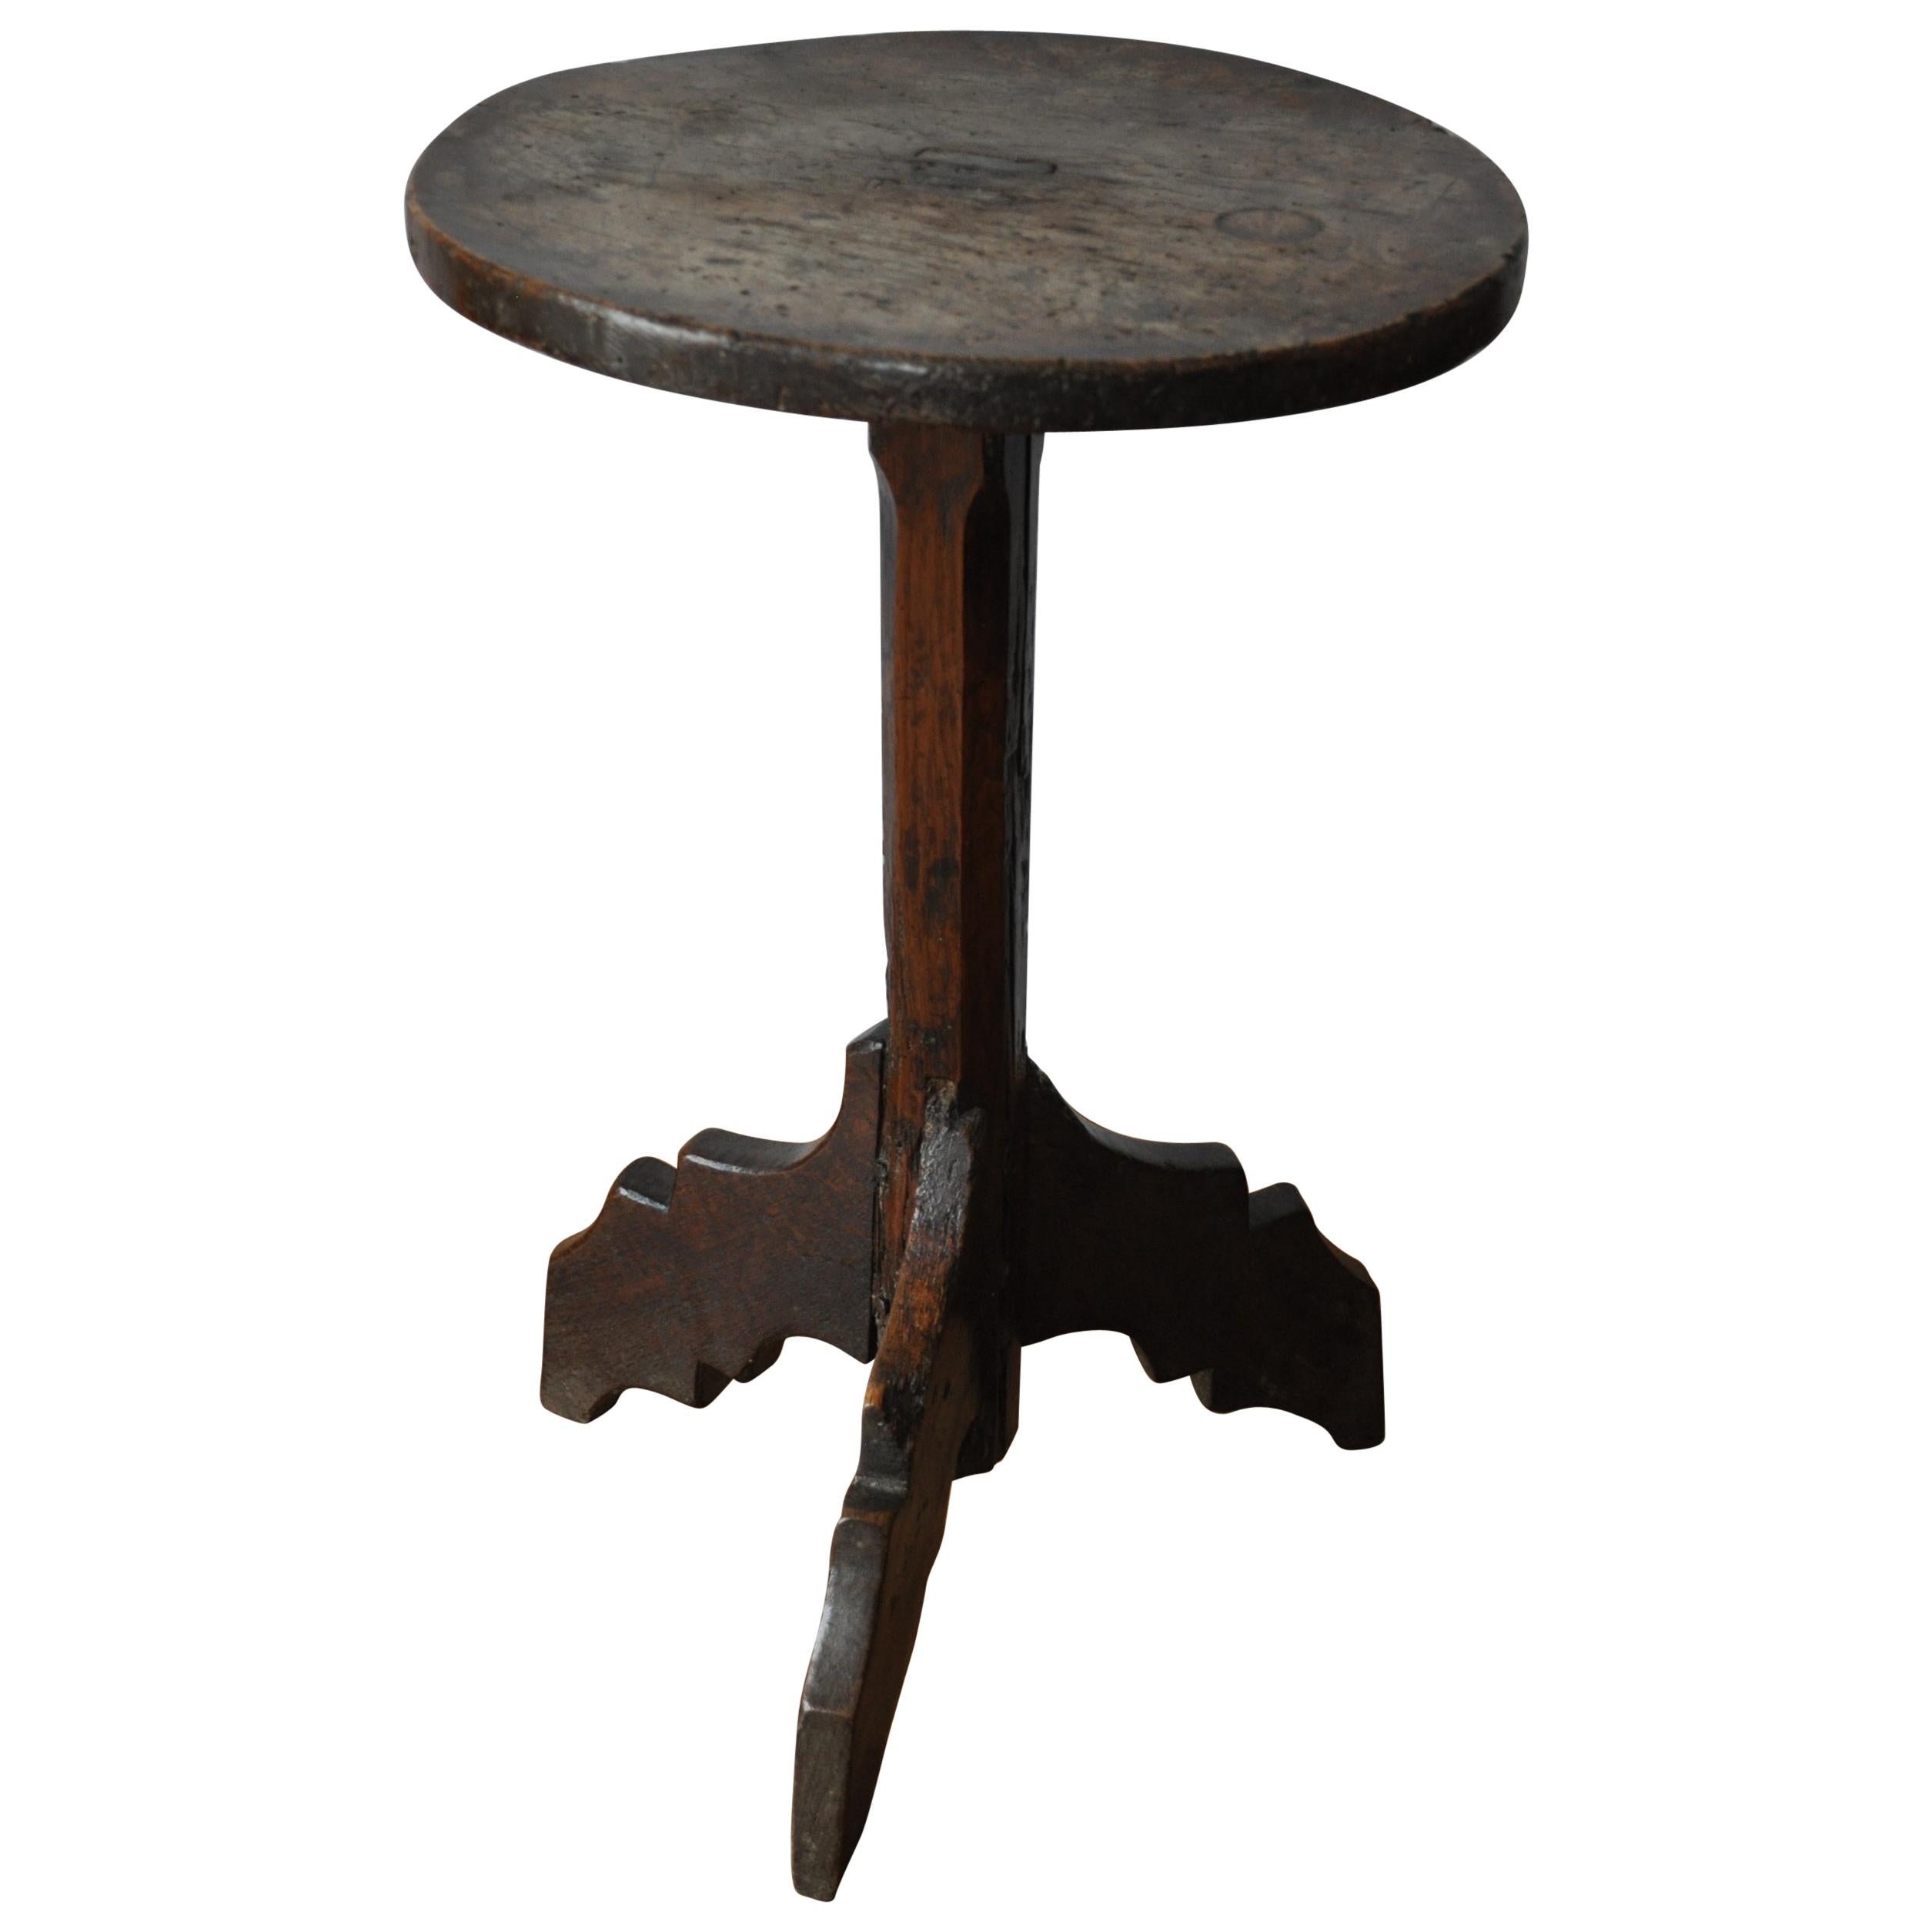 Rare antique French Haute Époque 16th century walnut Tripod Table / candle stand im Angebot